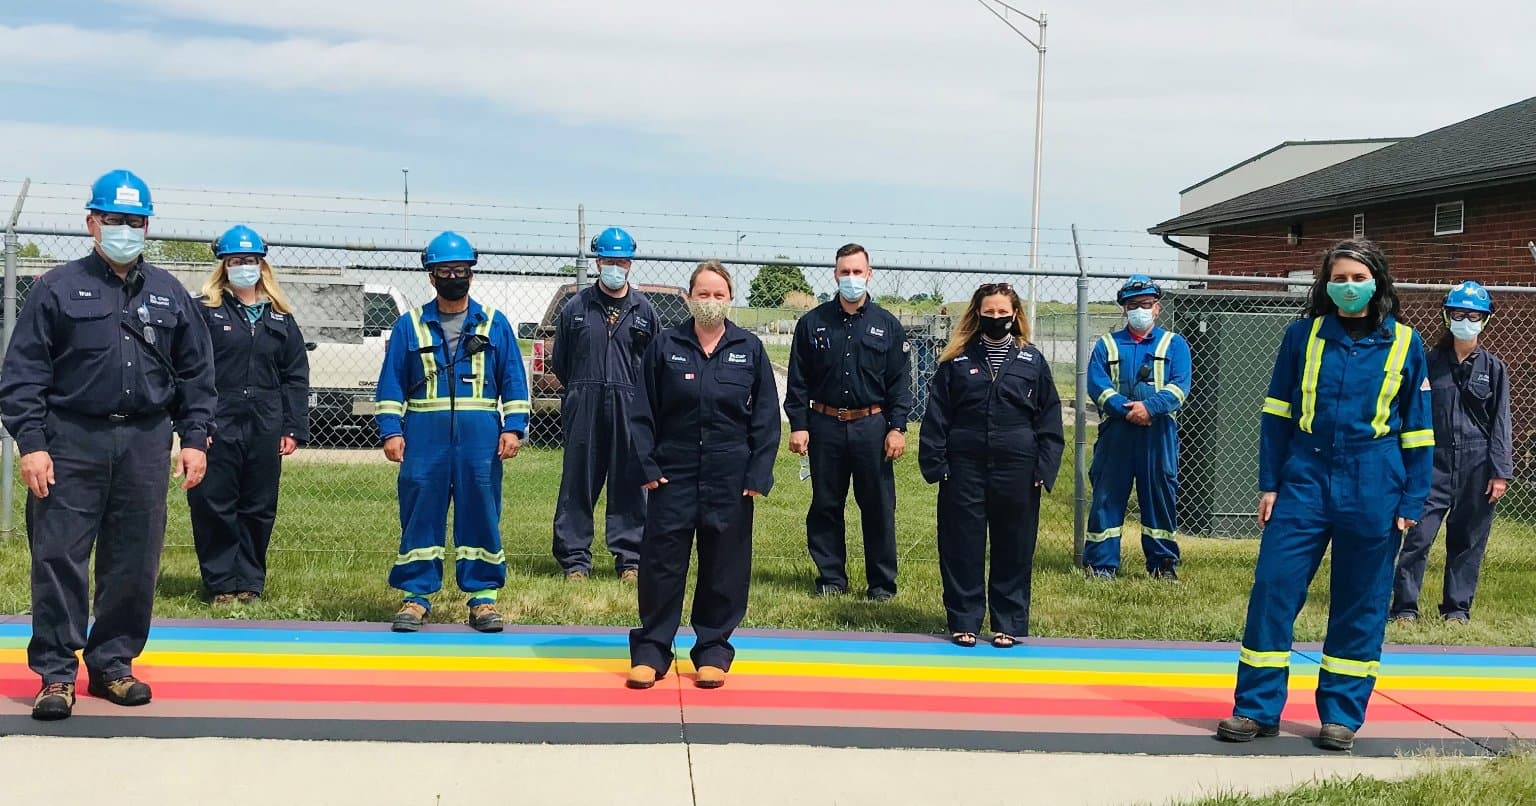 In recognition of Pride Month, a permanent rainbow sidewalk has been installed at the St. Clair Ethanol Plant. We’ll also be flying the Progress Pride flag at all of our operating sites throughout June. 